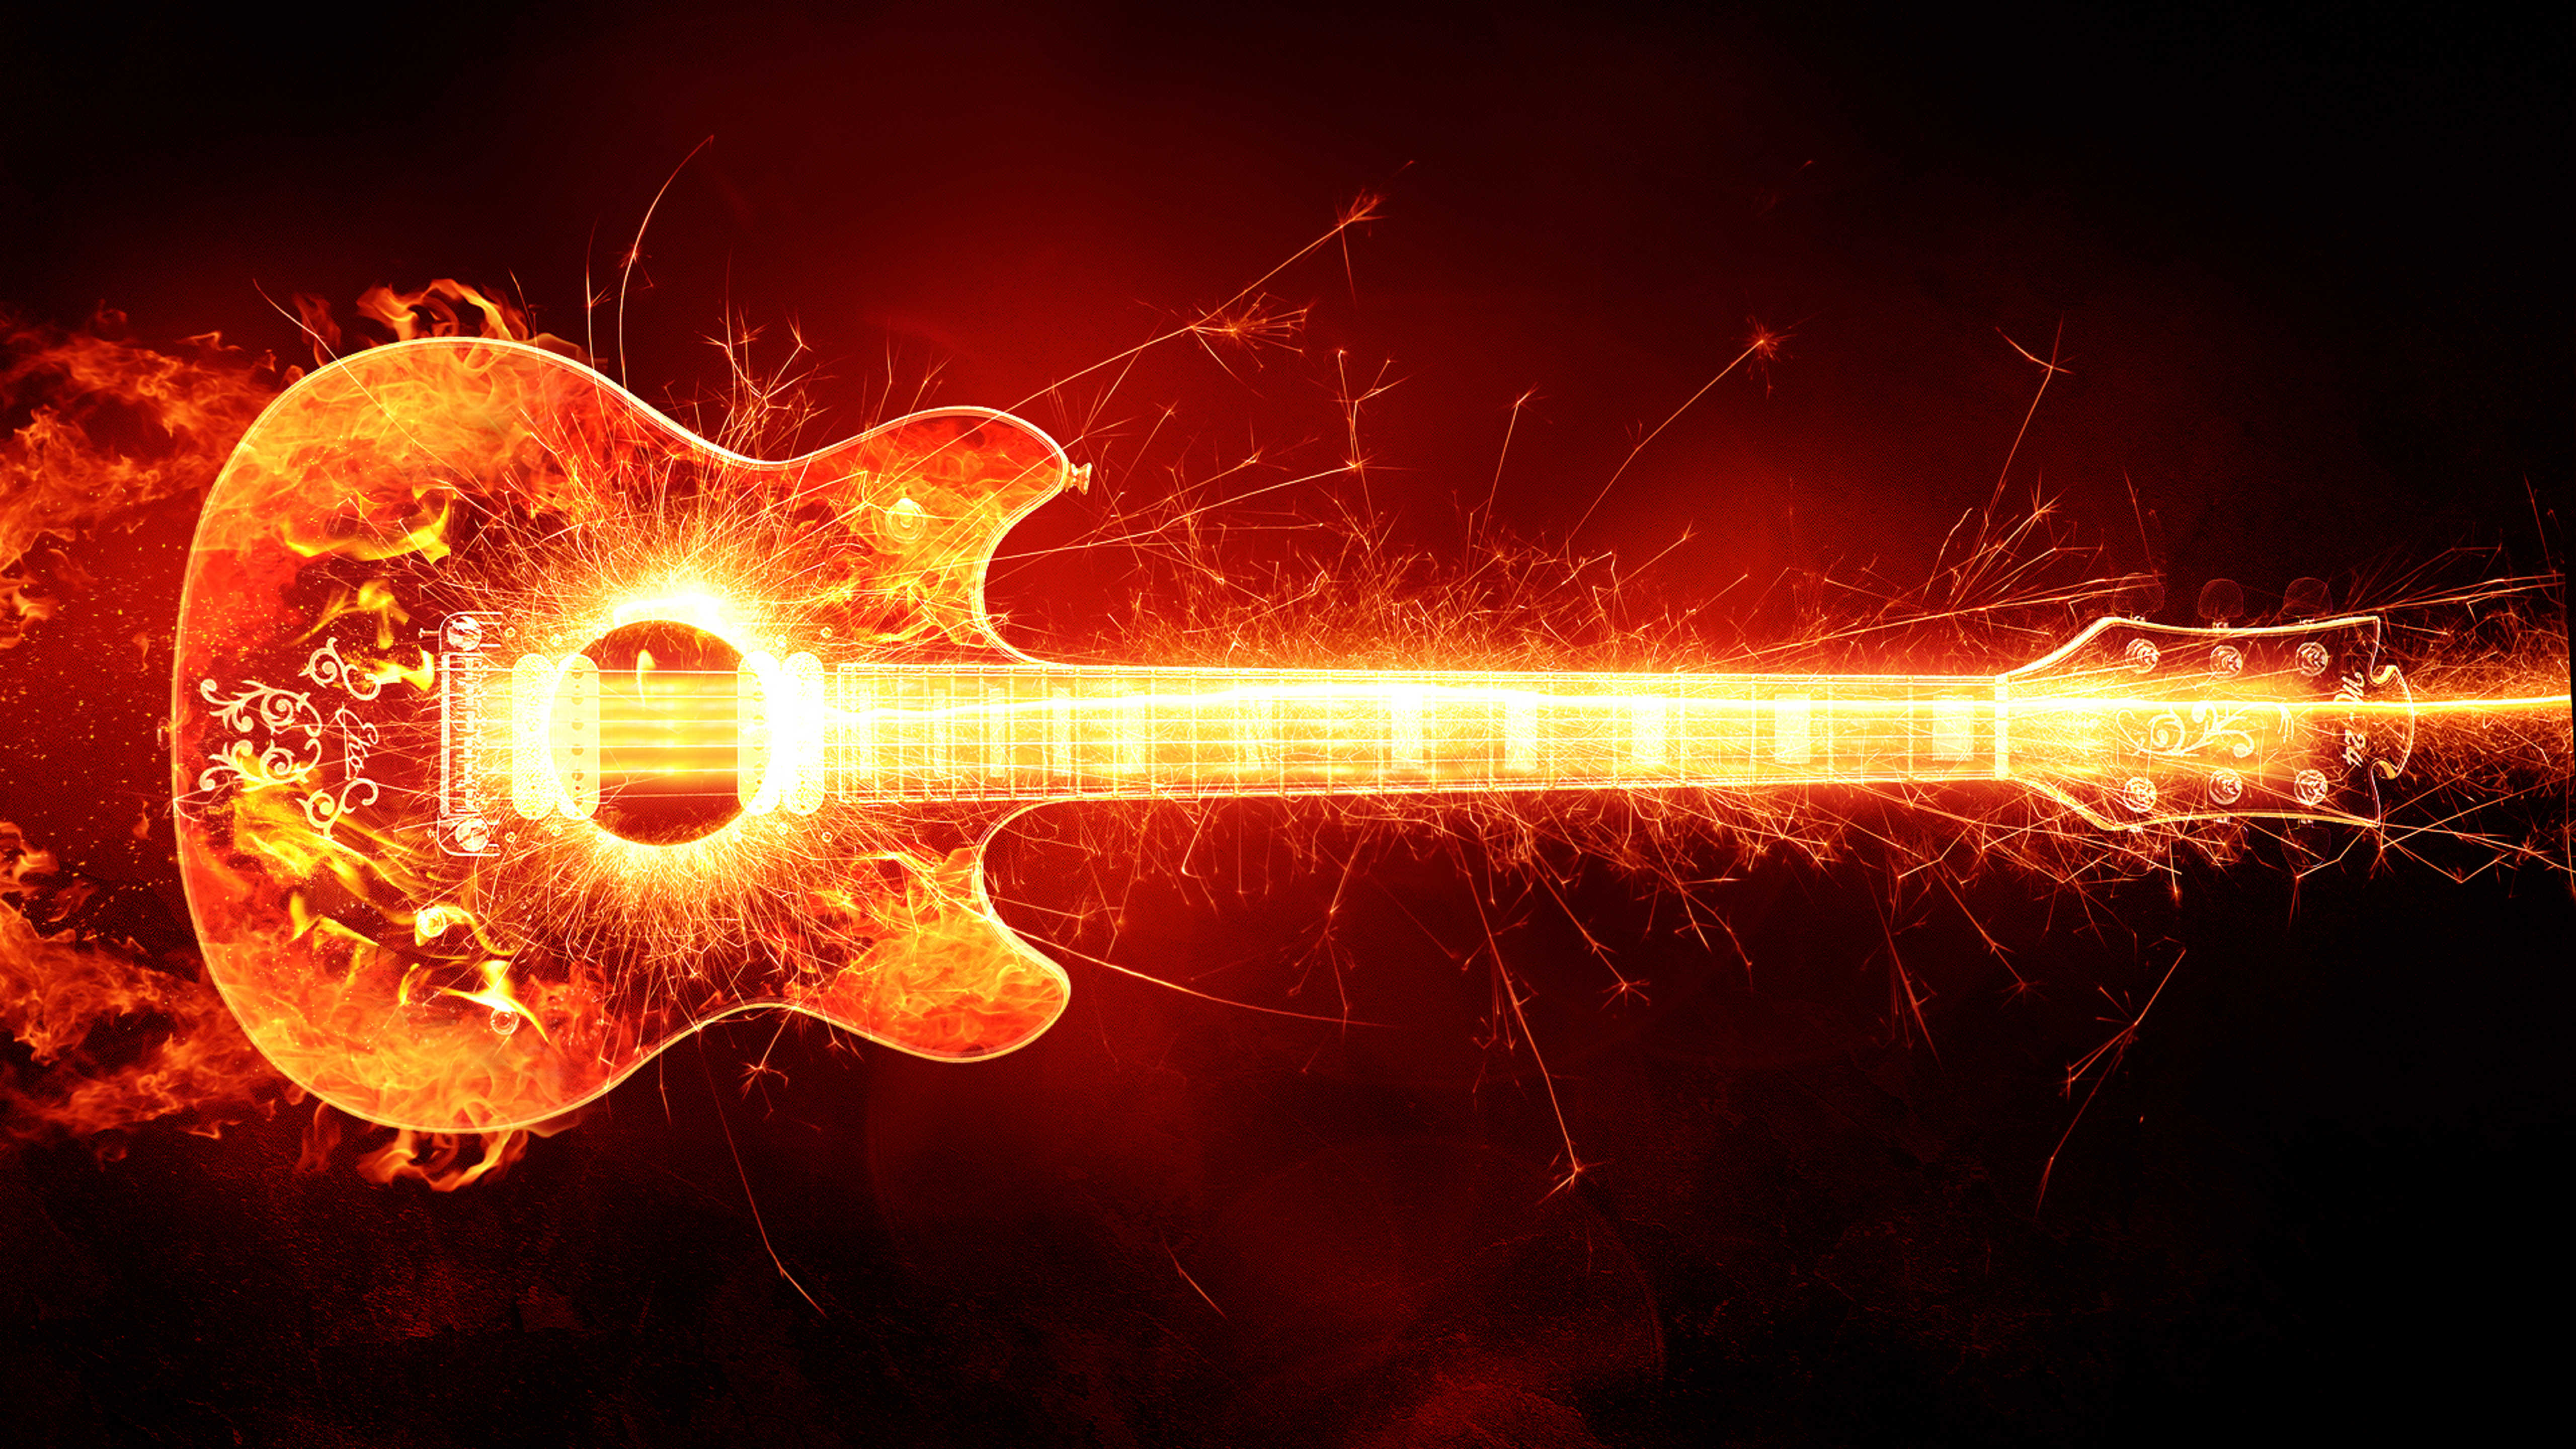 Wallpaper Guitar With Fire And Sparks